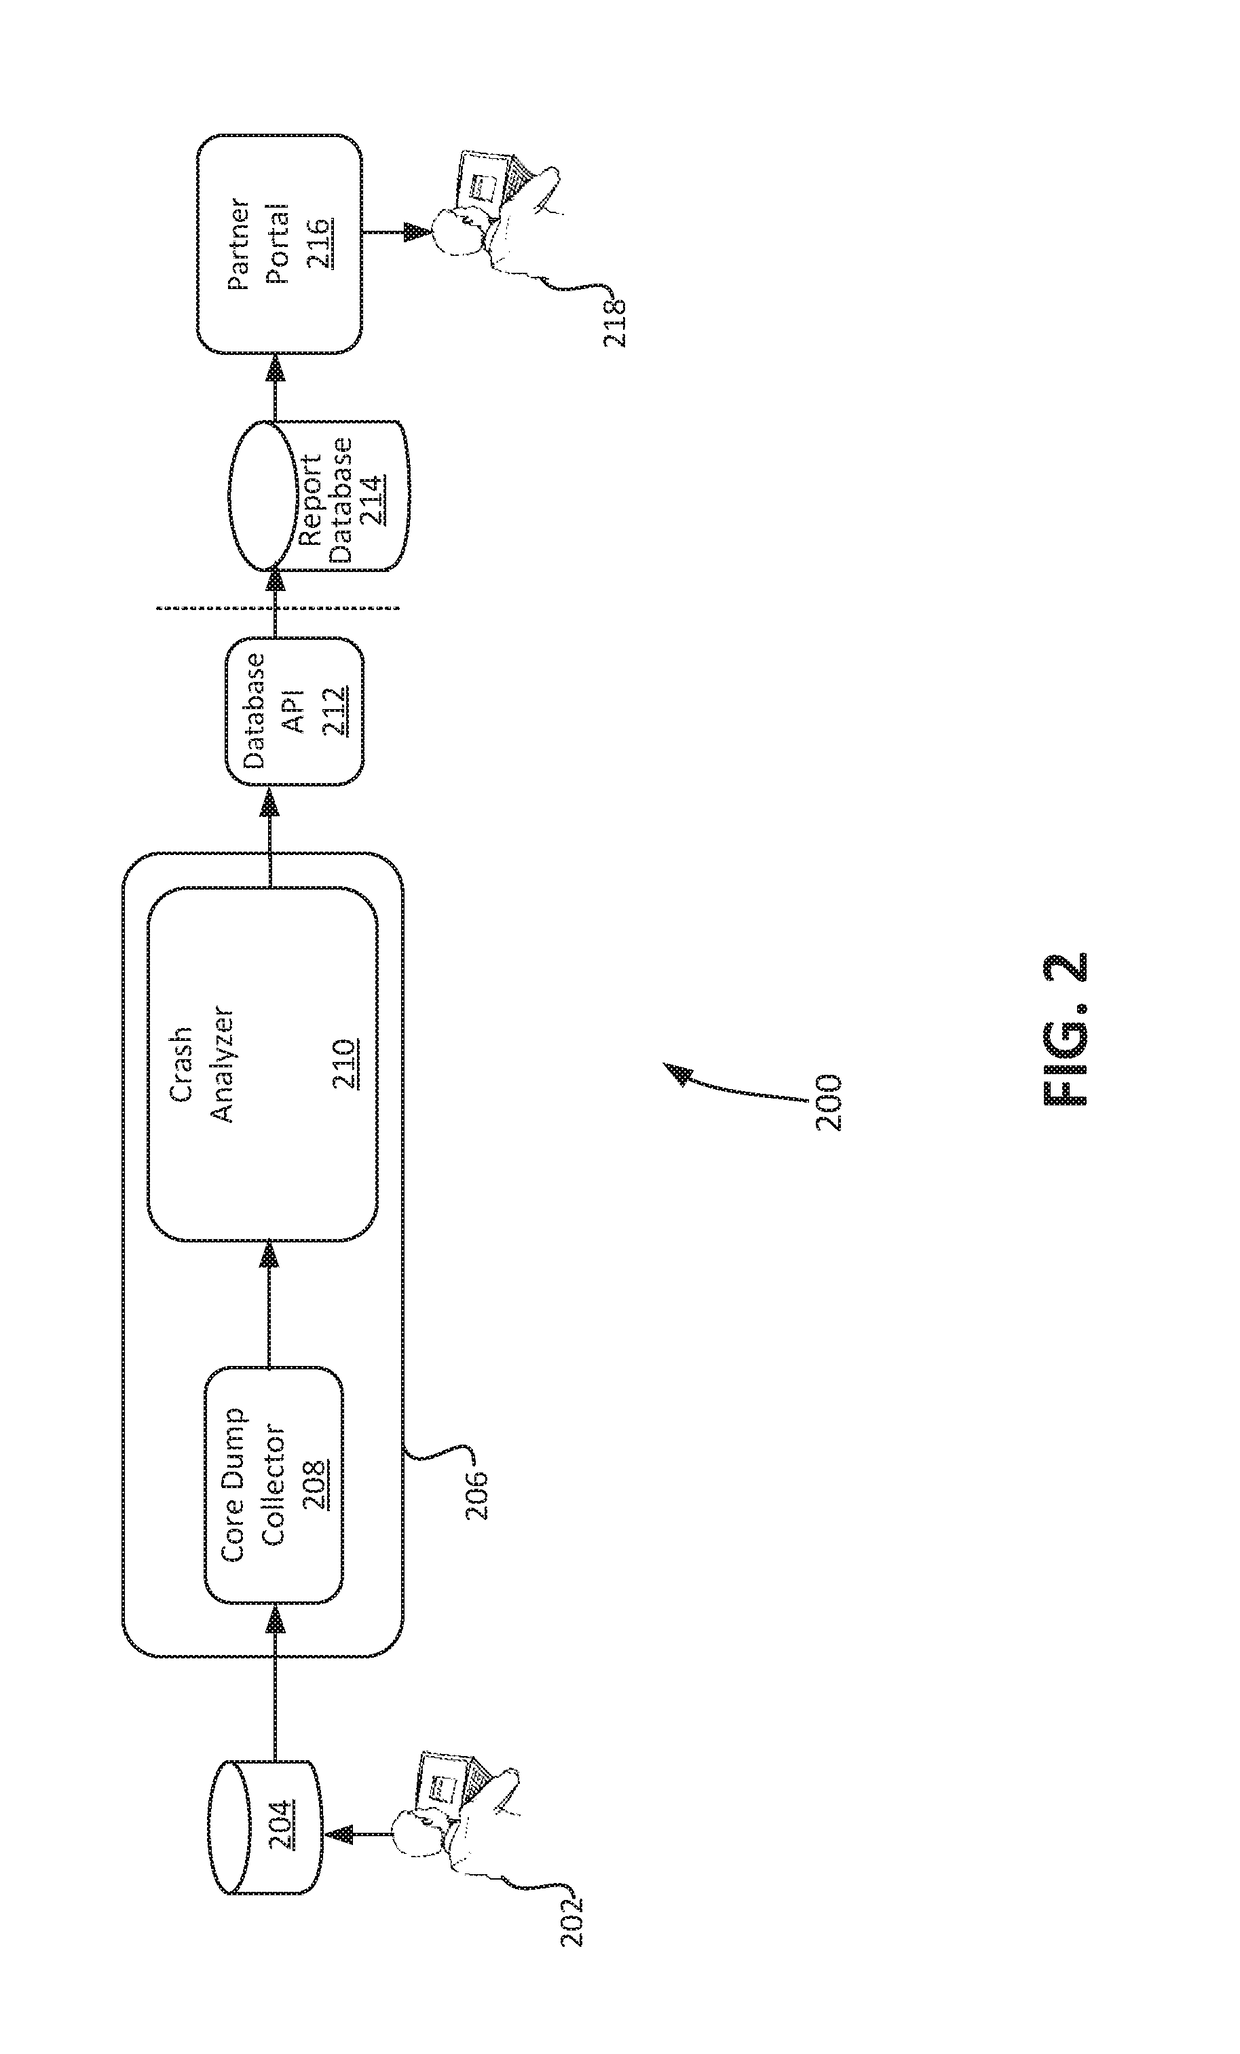 Monitoring of an automated end-to-end crash analysis system